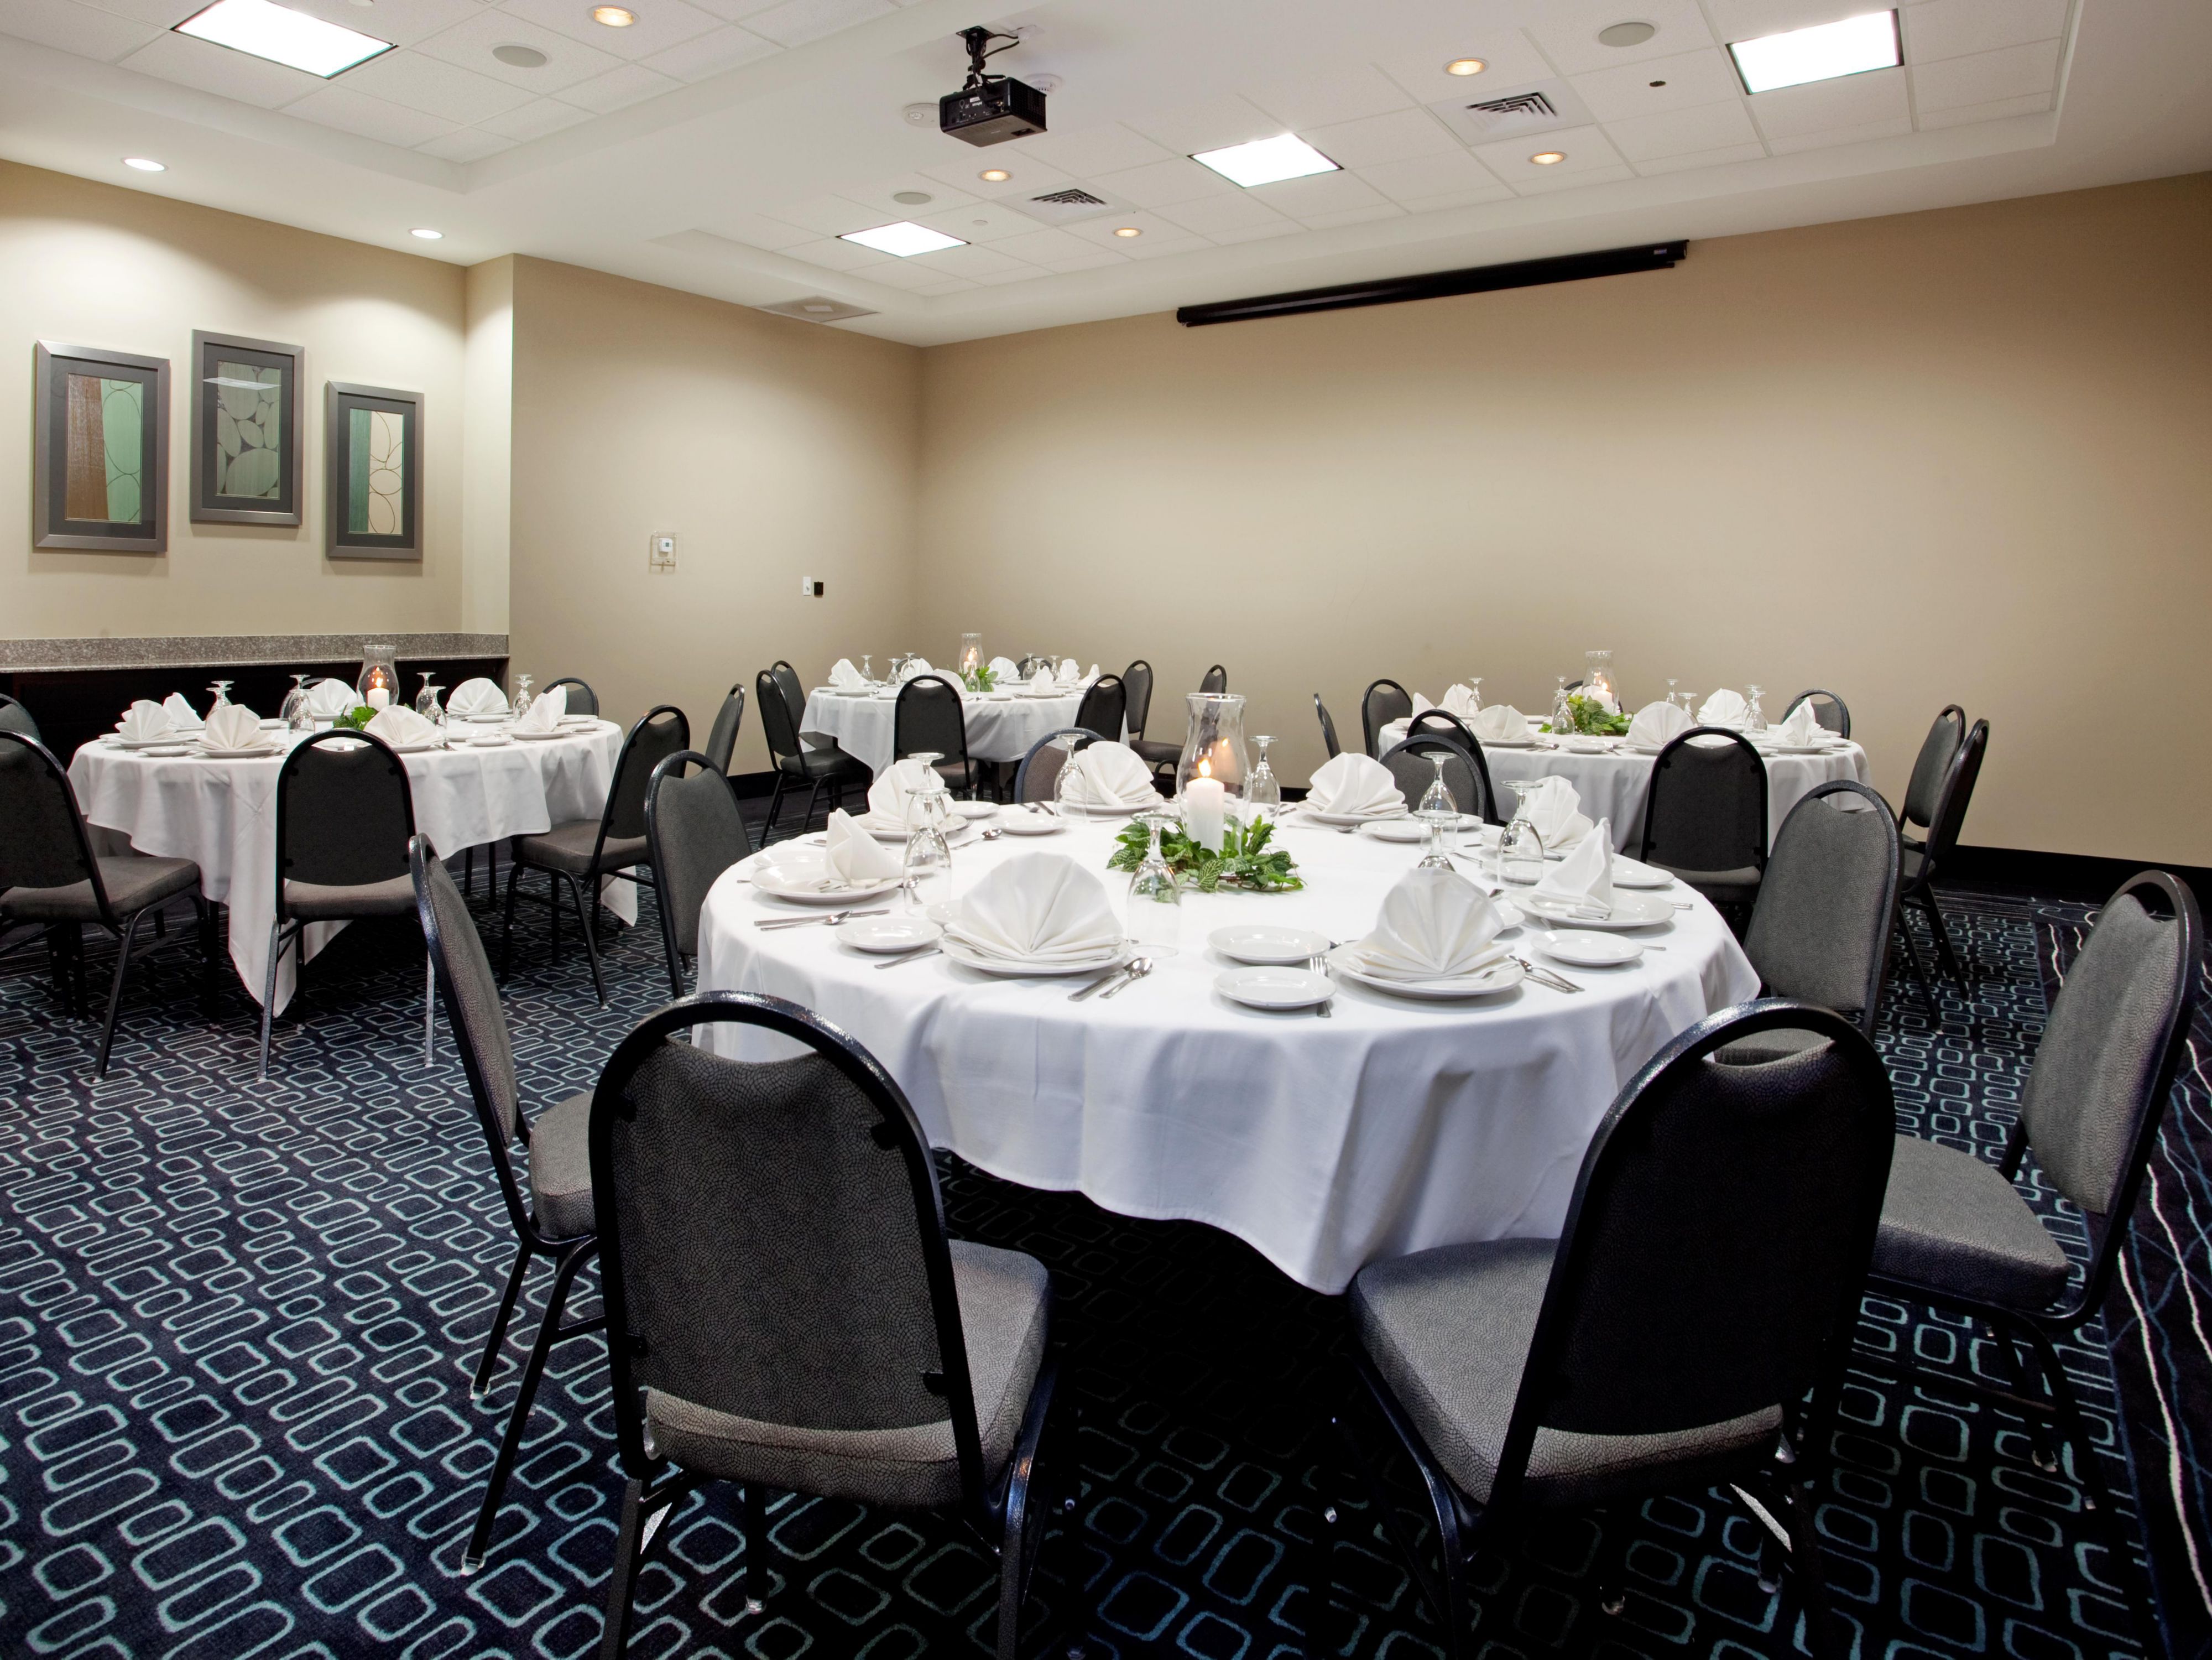 With over 3,000 square feet of flexible space, we can accommodate groups of various sizes. We also offer full catering and audio-visual services, so leave all the work to us!